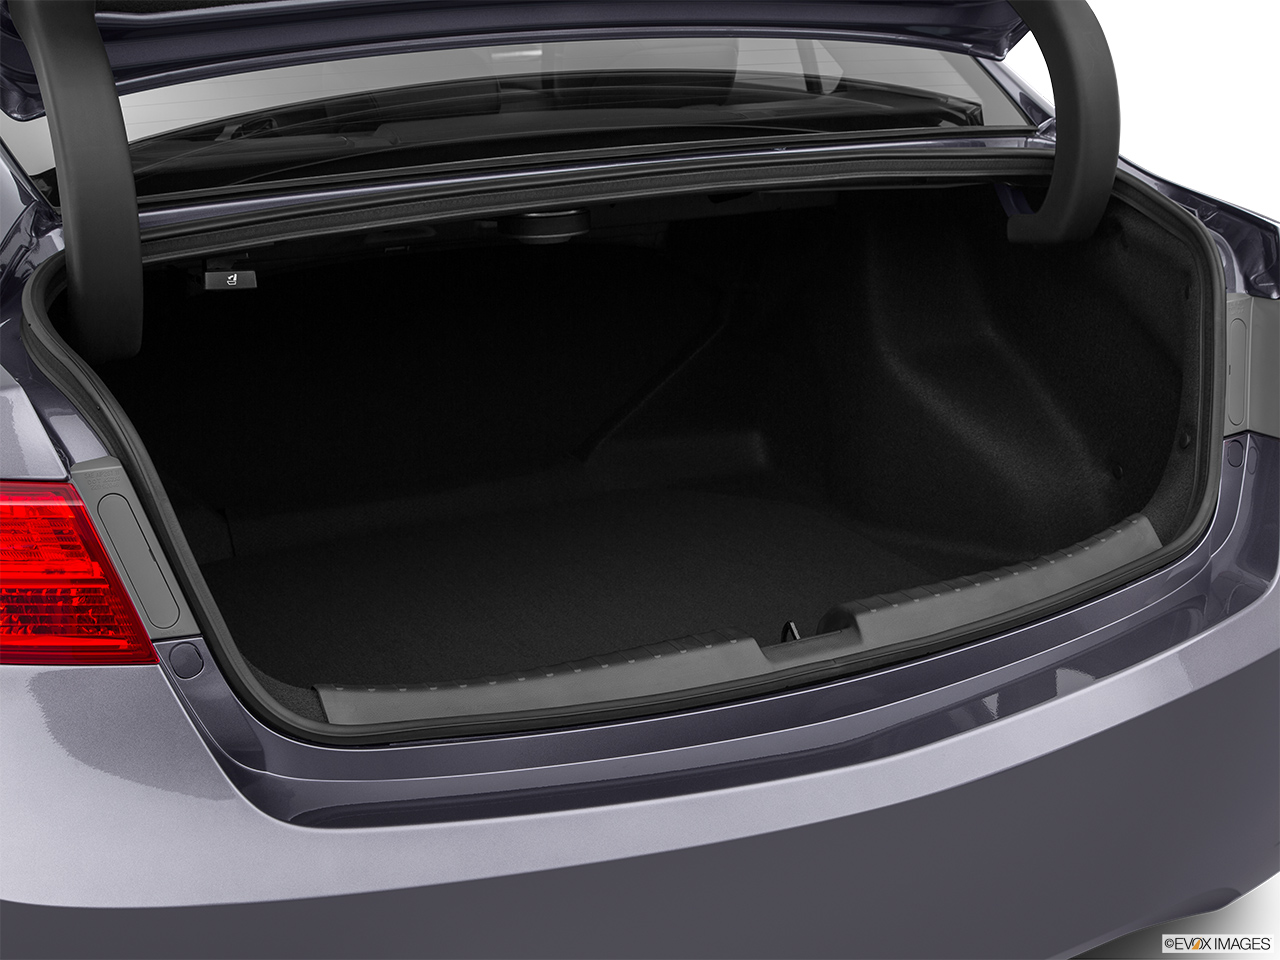 2015 Acura ILX 5-Speed Automatic Trunk open. 